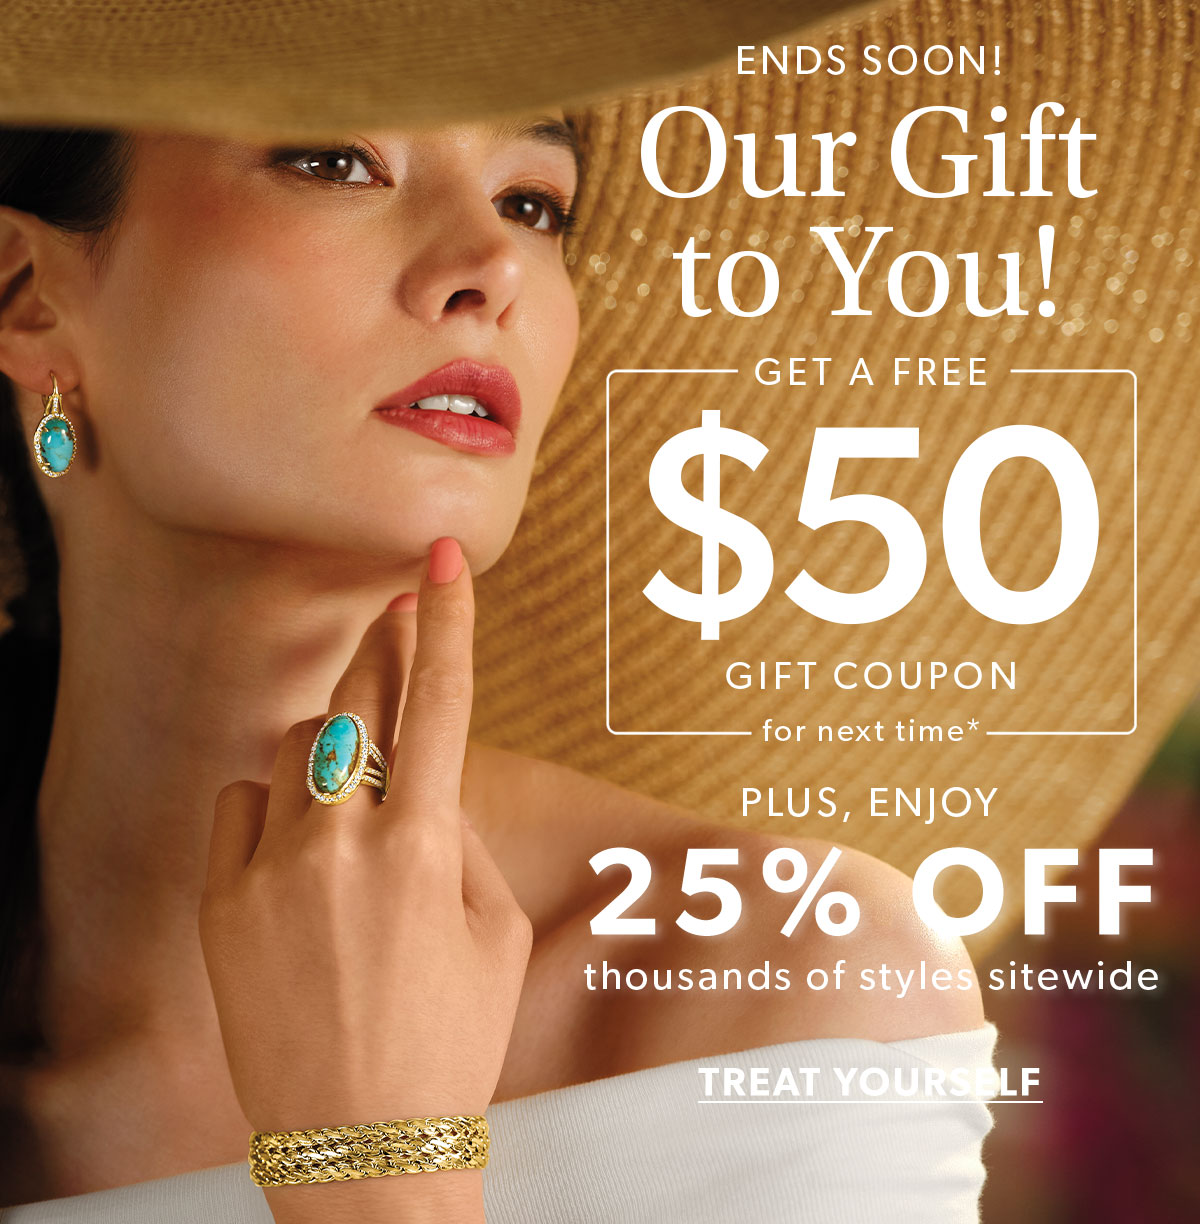 Our Gift To You! Get a Free $50 Gift Coupon for Next Time*